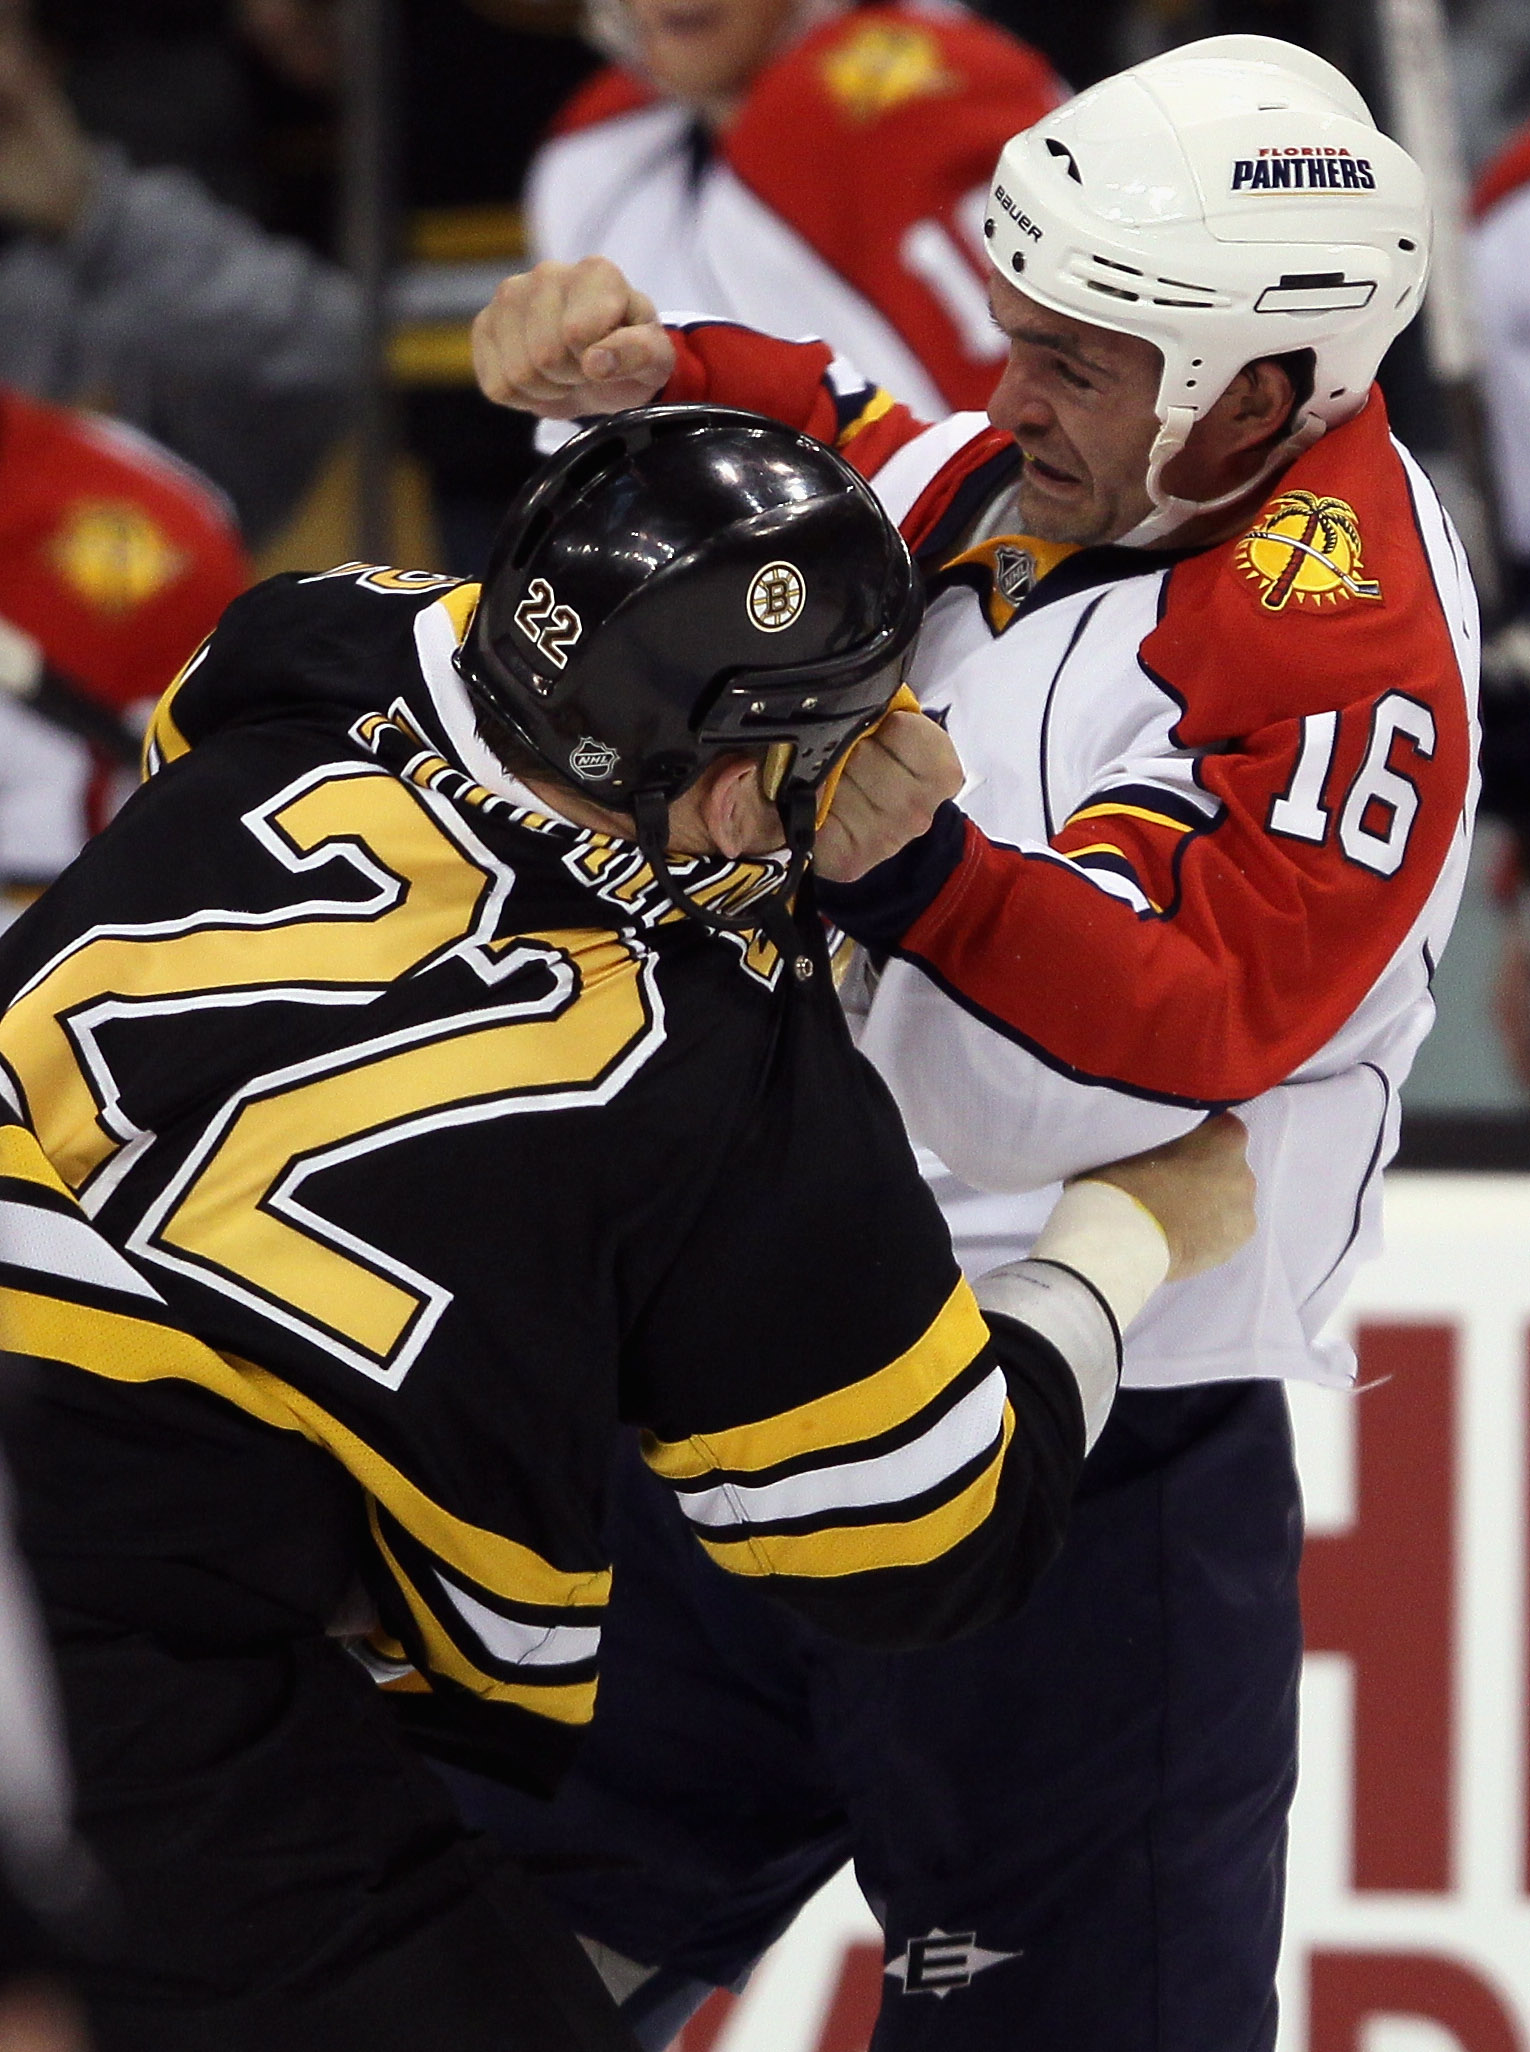 BOSTON - NOVEMBER 18:  Shawn Thornton #22 of the Boston Bruins and Darcy Hordichuk #16 of the Florida Panther exchange punches on November 18, 2010 at the TD Garden in Boston, Massachusetts.  (Photo by Elsa/Getty Images)